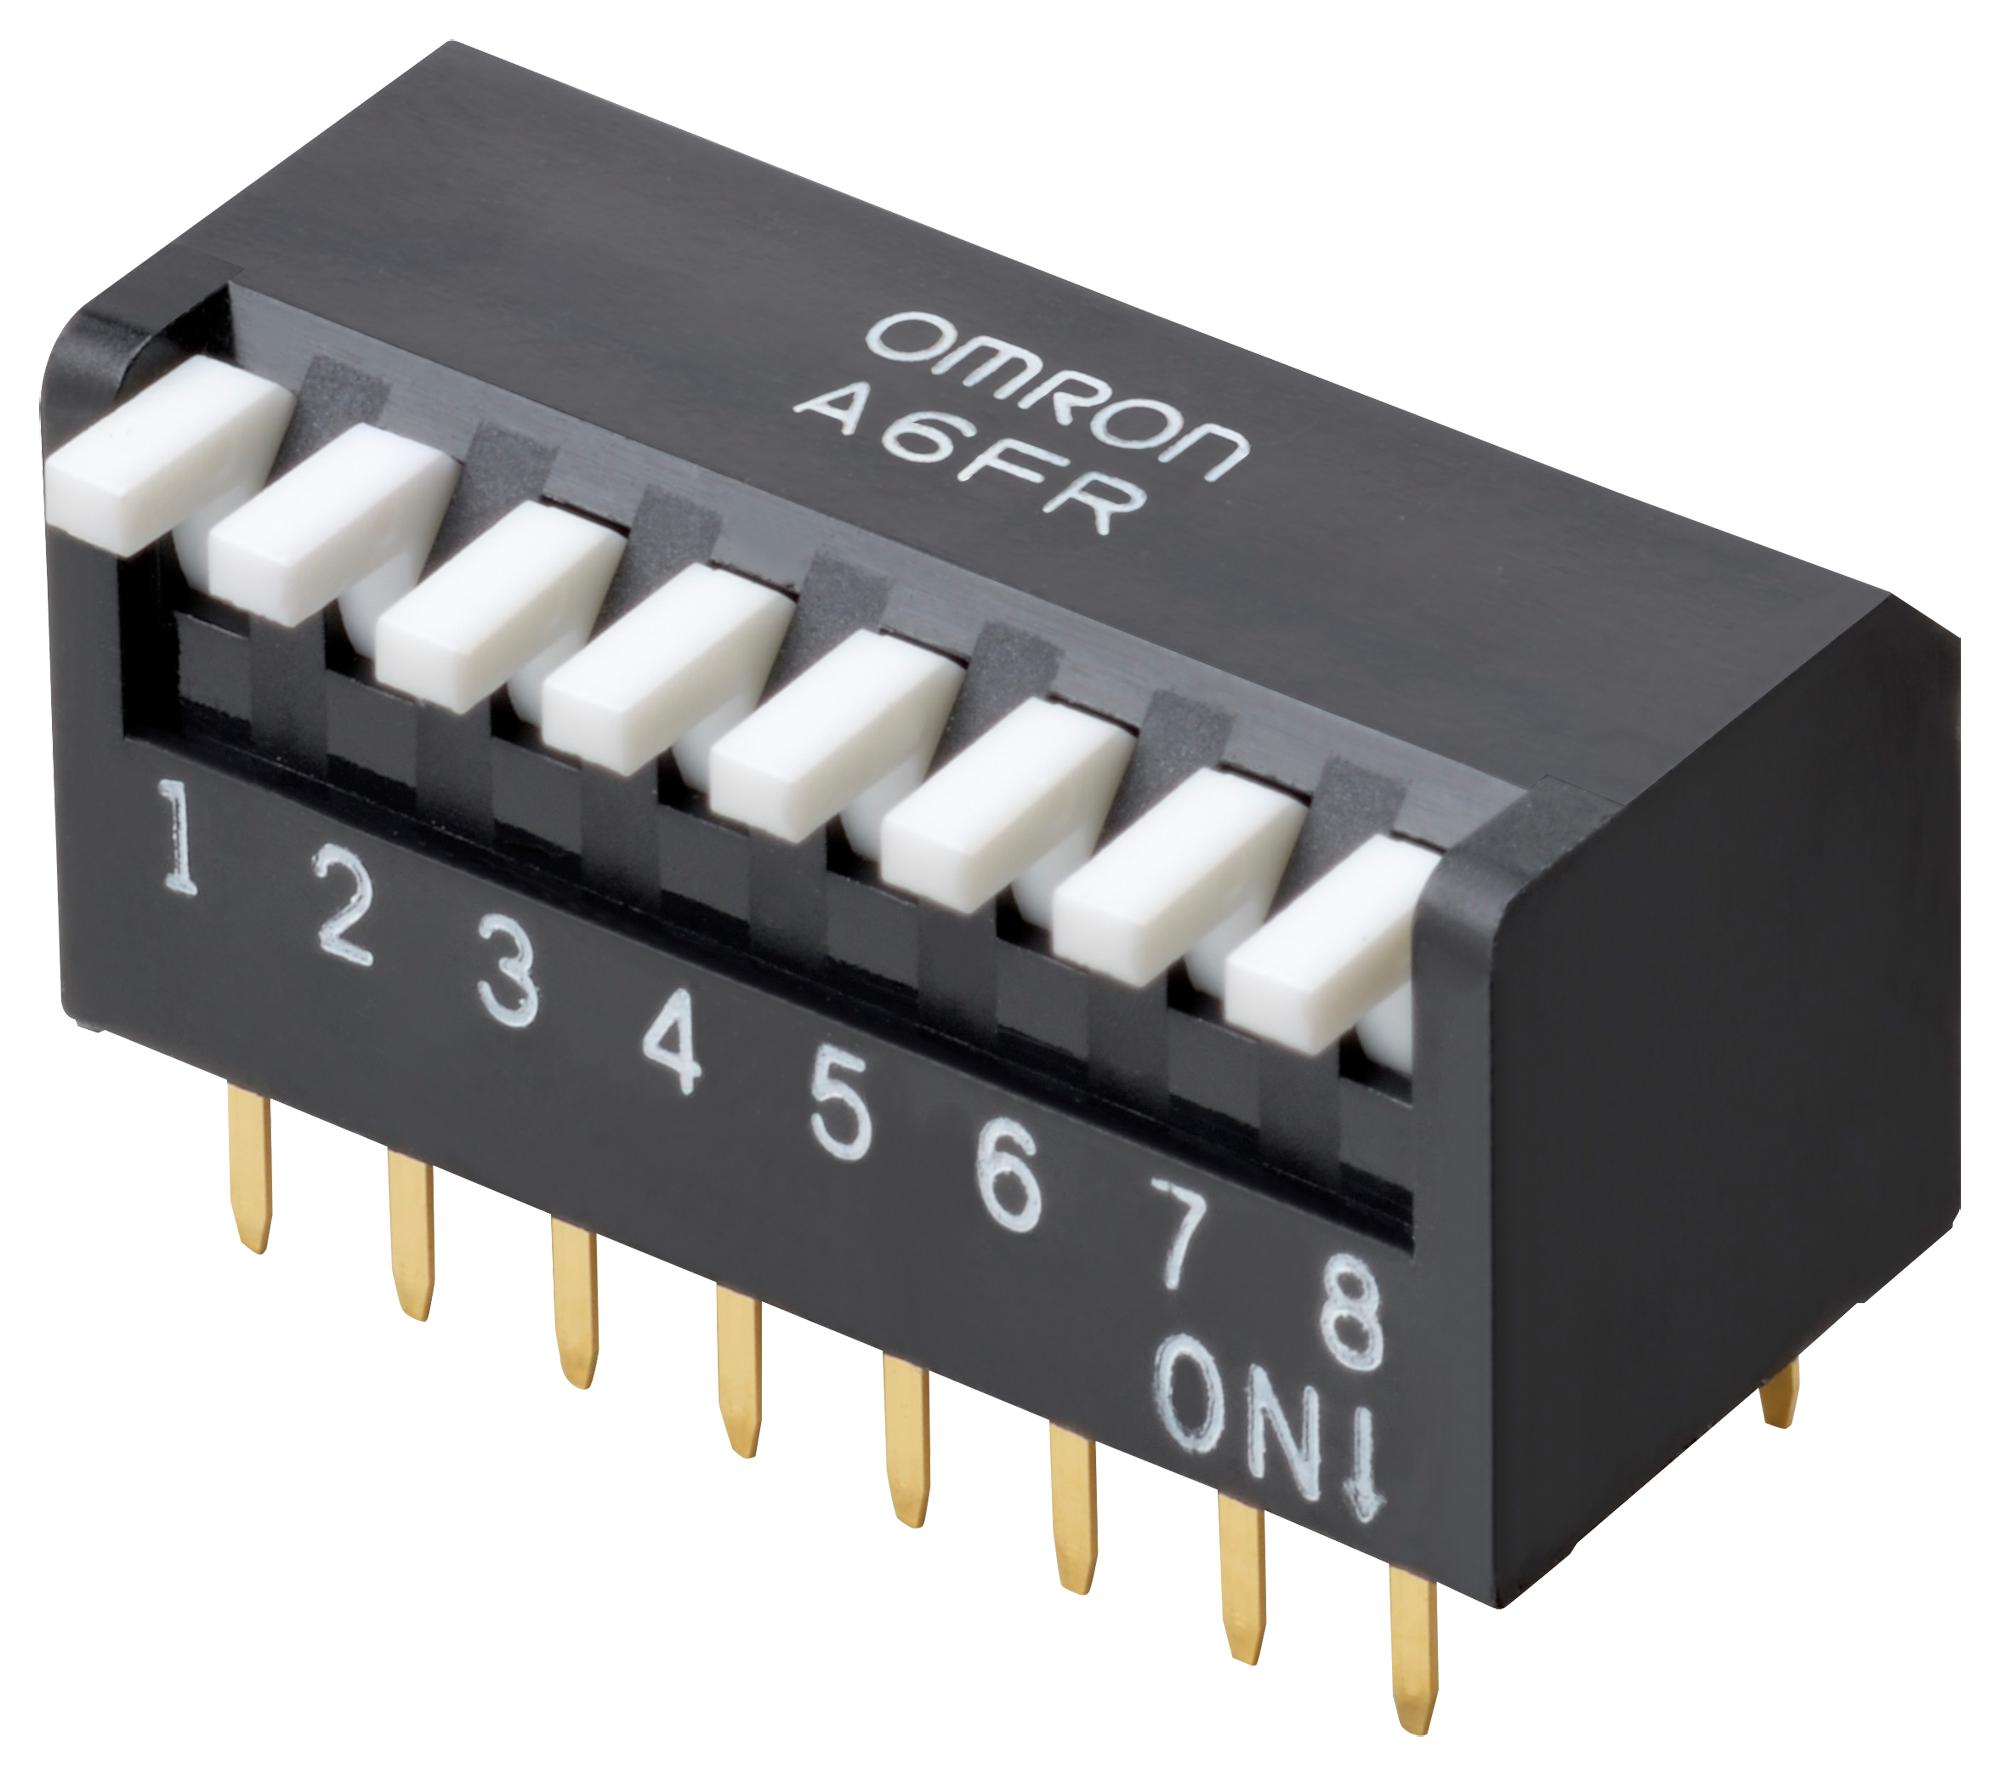 A6FR-6104 DIP SWITCH, 6POS, SPST, PIANO KEY, TH OMRON